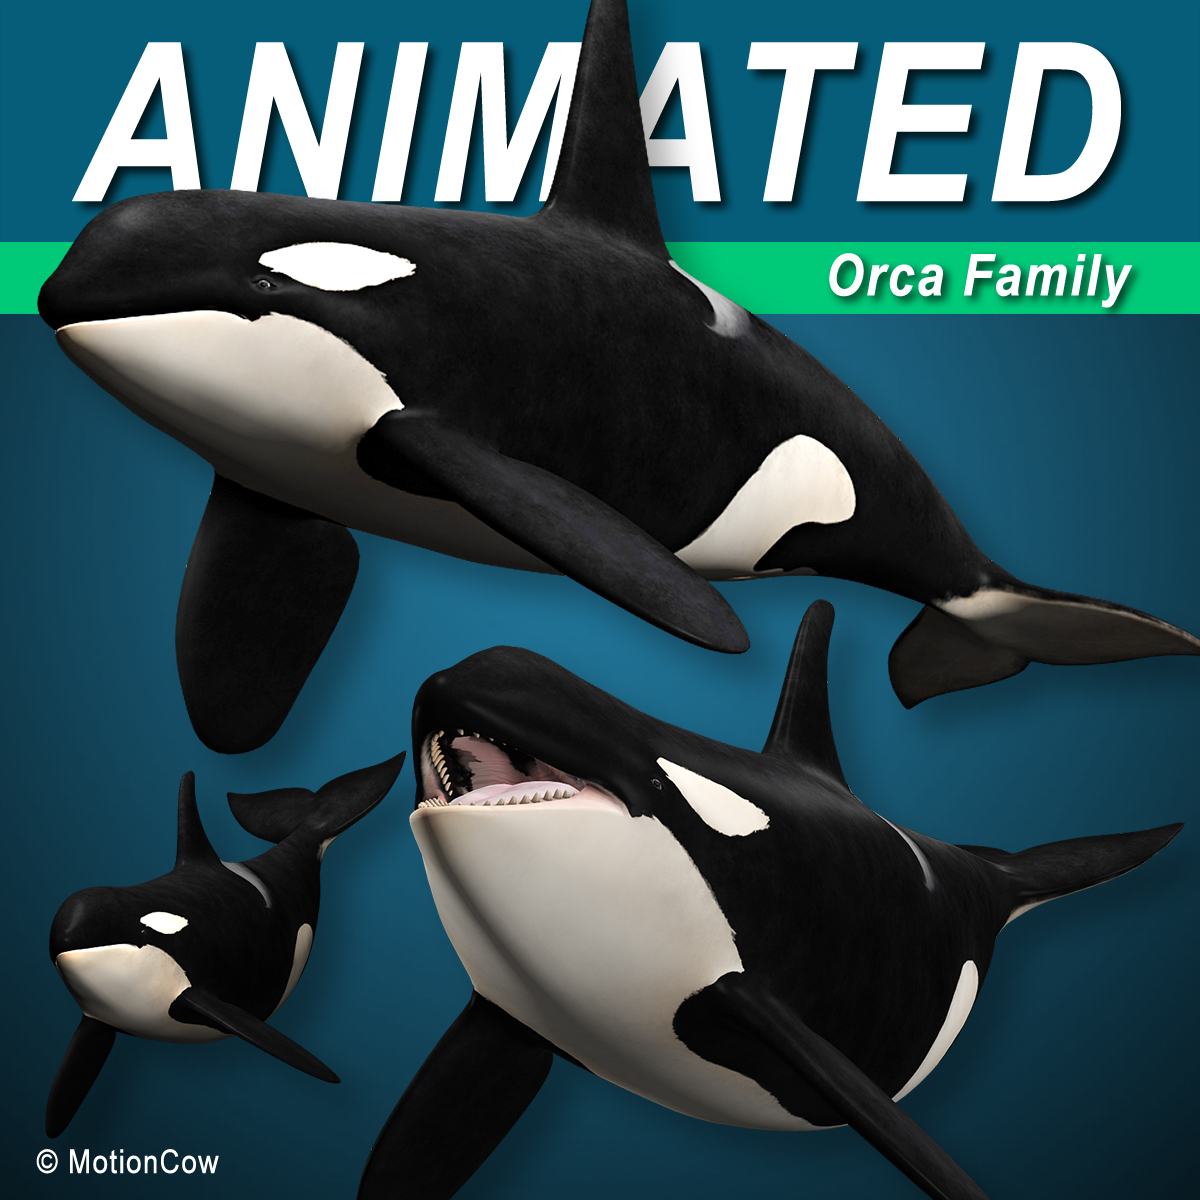 Orca (Killer Whale) Family – MotionCow